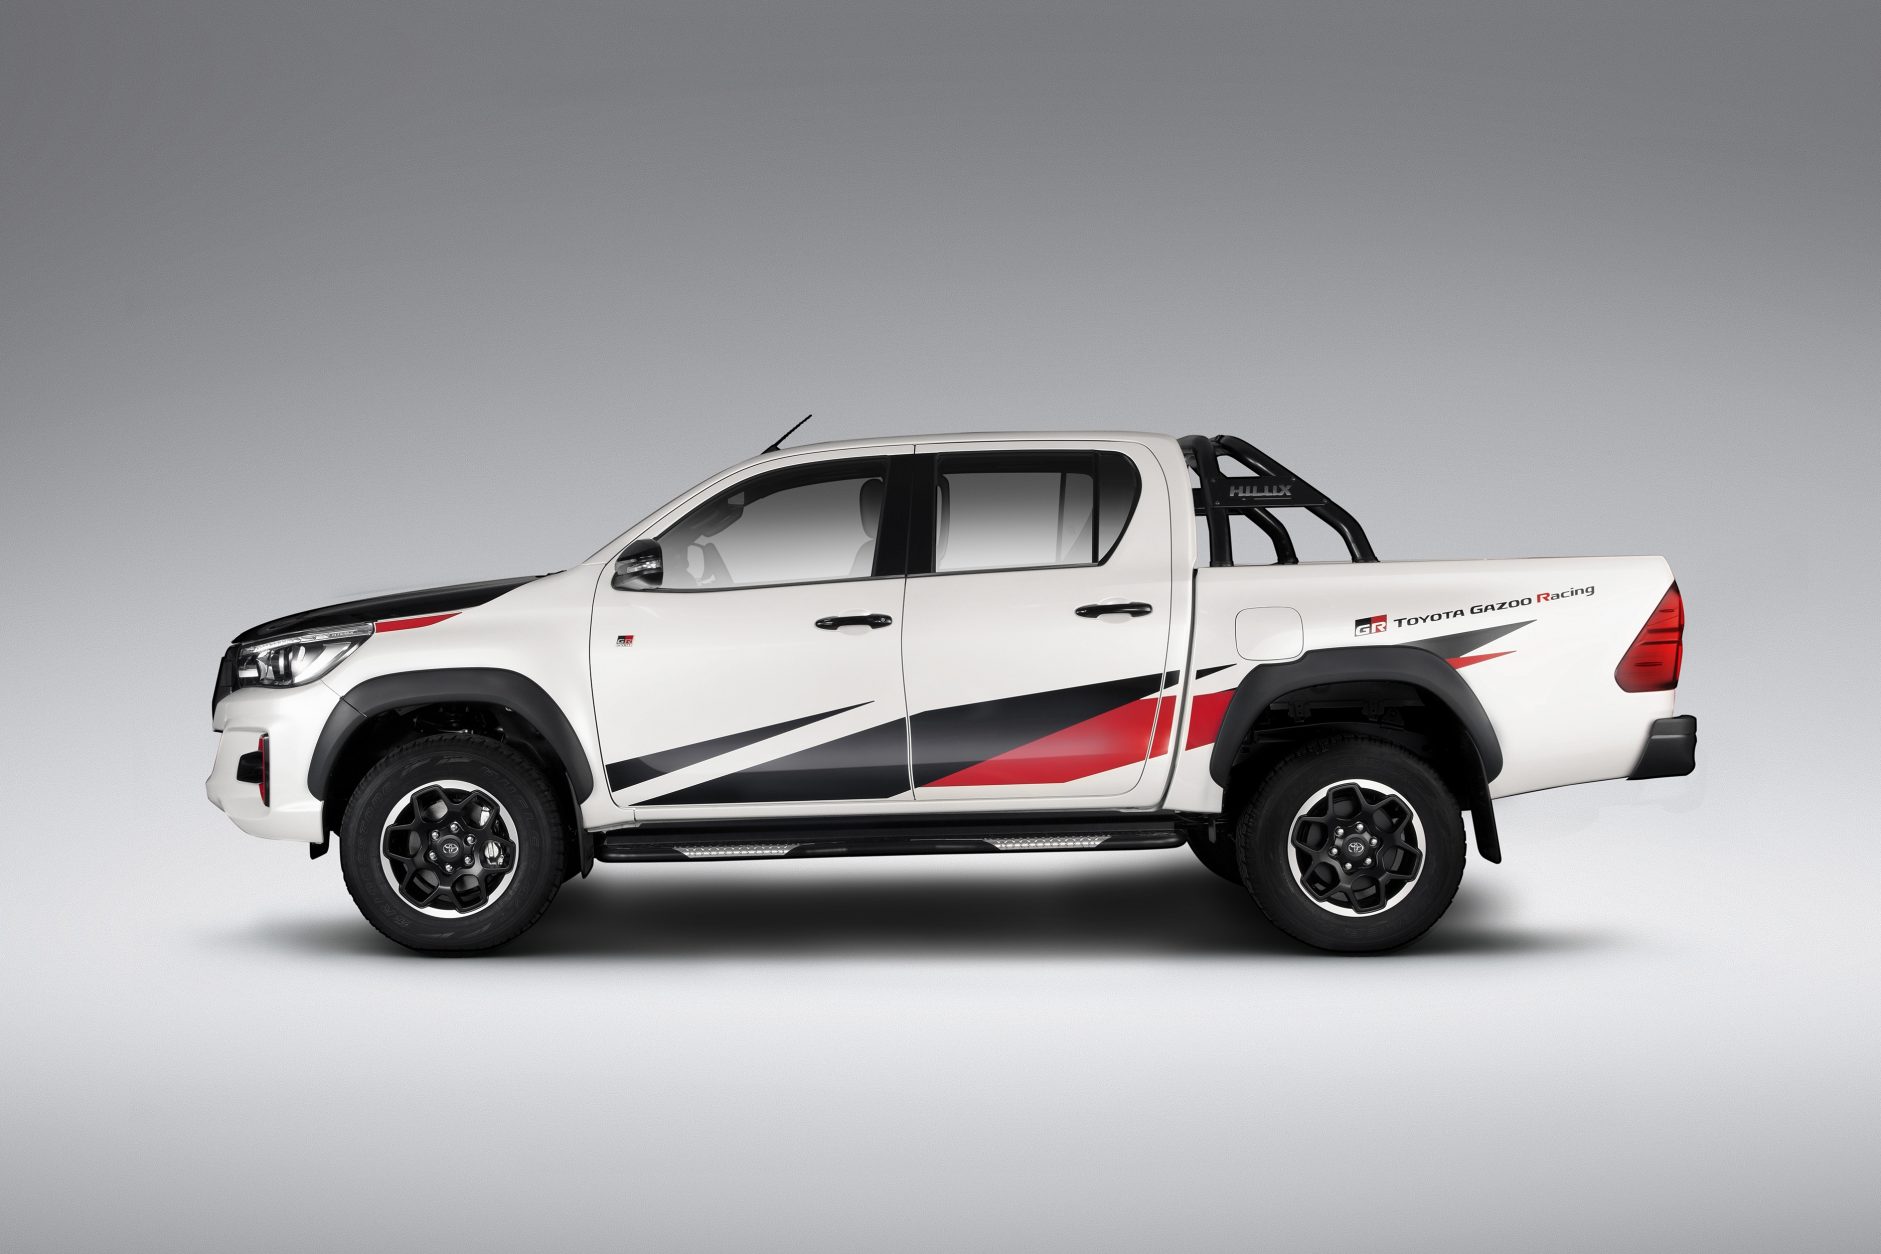 Best 2022 Toyota Hilux Front High Resolution Wallpaper - Toyota Hilux Gazoo Racing 2019 - HD Wallpaper 